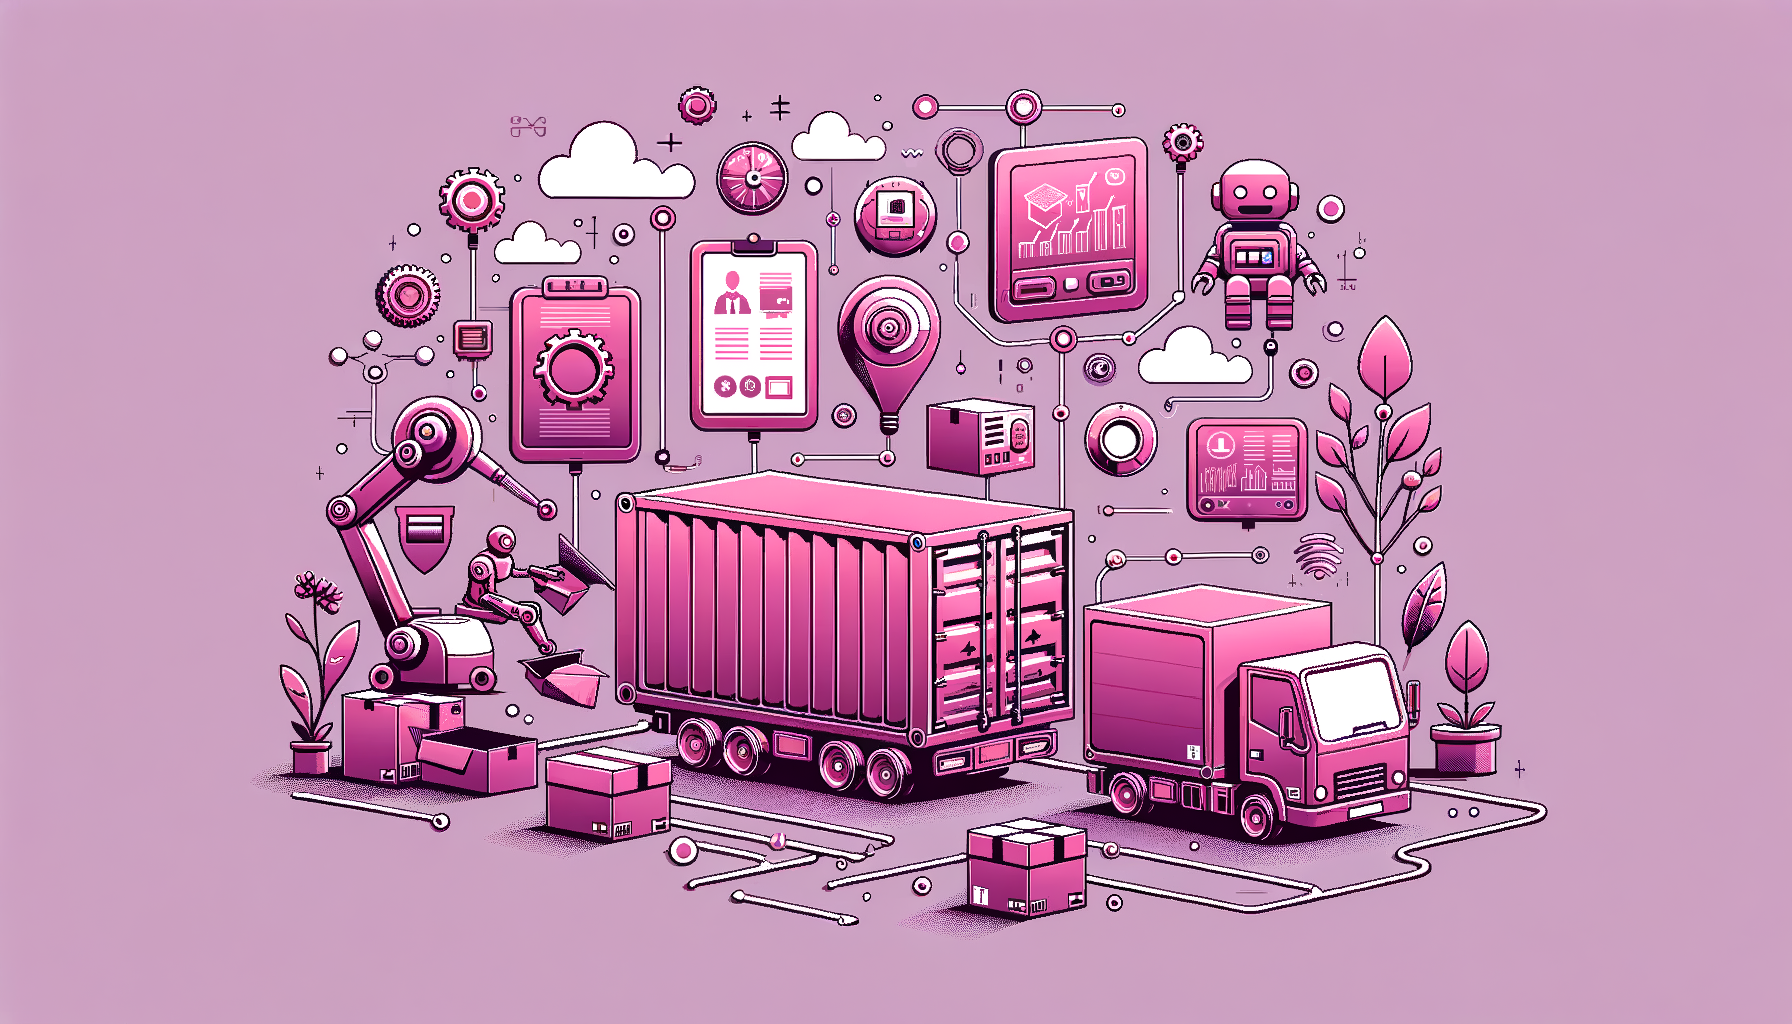 Cartoon illustration in fuchsia tones showcasing futuristic trends and innovations in the portable storage industry.